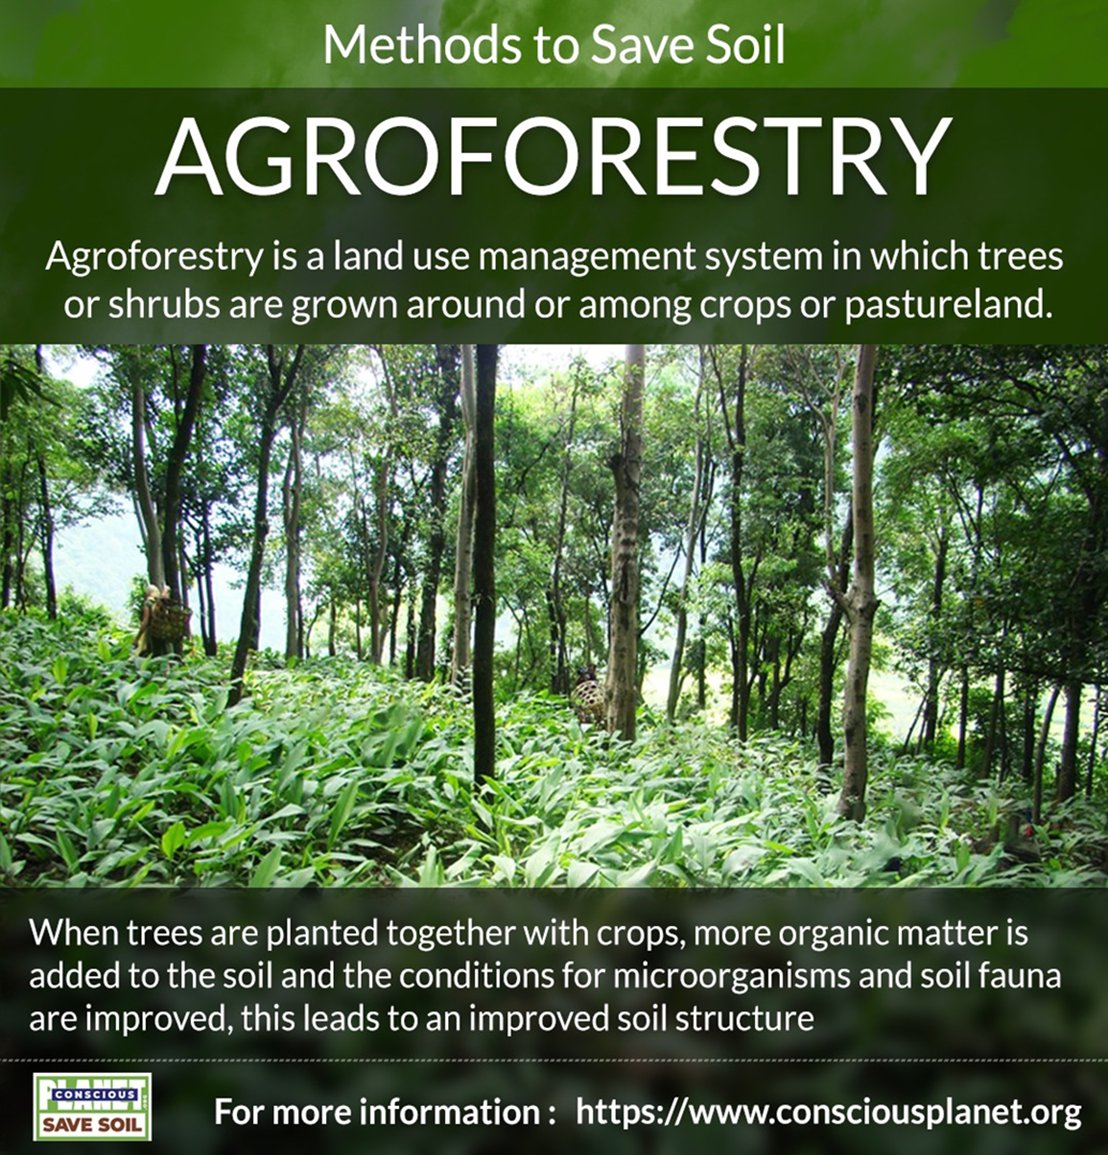 Greening of wastelands with agroforestry intervention can play a significant role in mitigating climate change, and meeting national target of 33% green cover-GROW 2024. Forests provide a “carbon sink” that absorbs a net 7.6 bMT of CO2 per year.
wri.org/insights/.
#SaveSoil